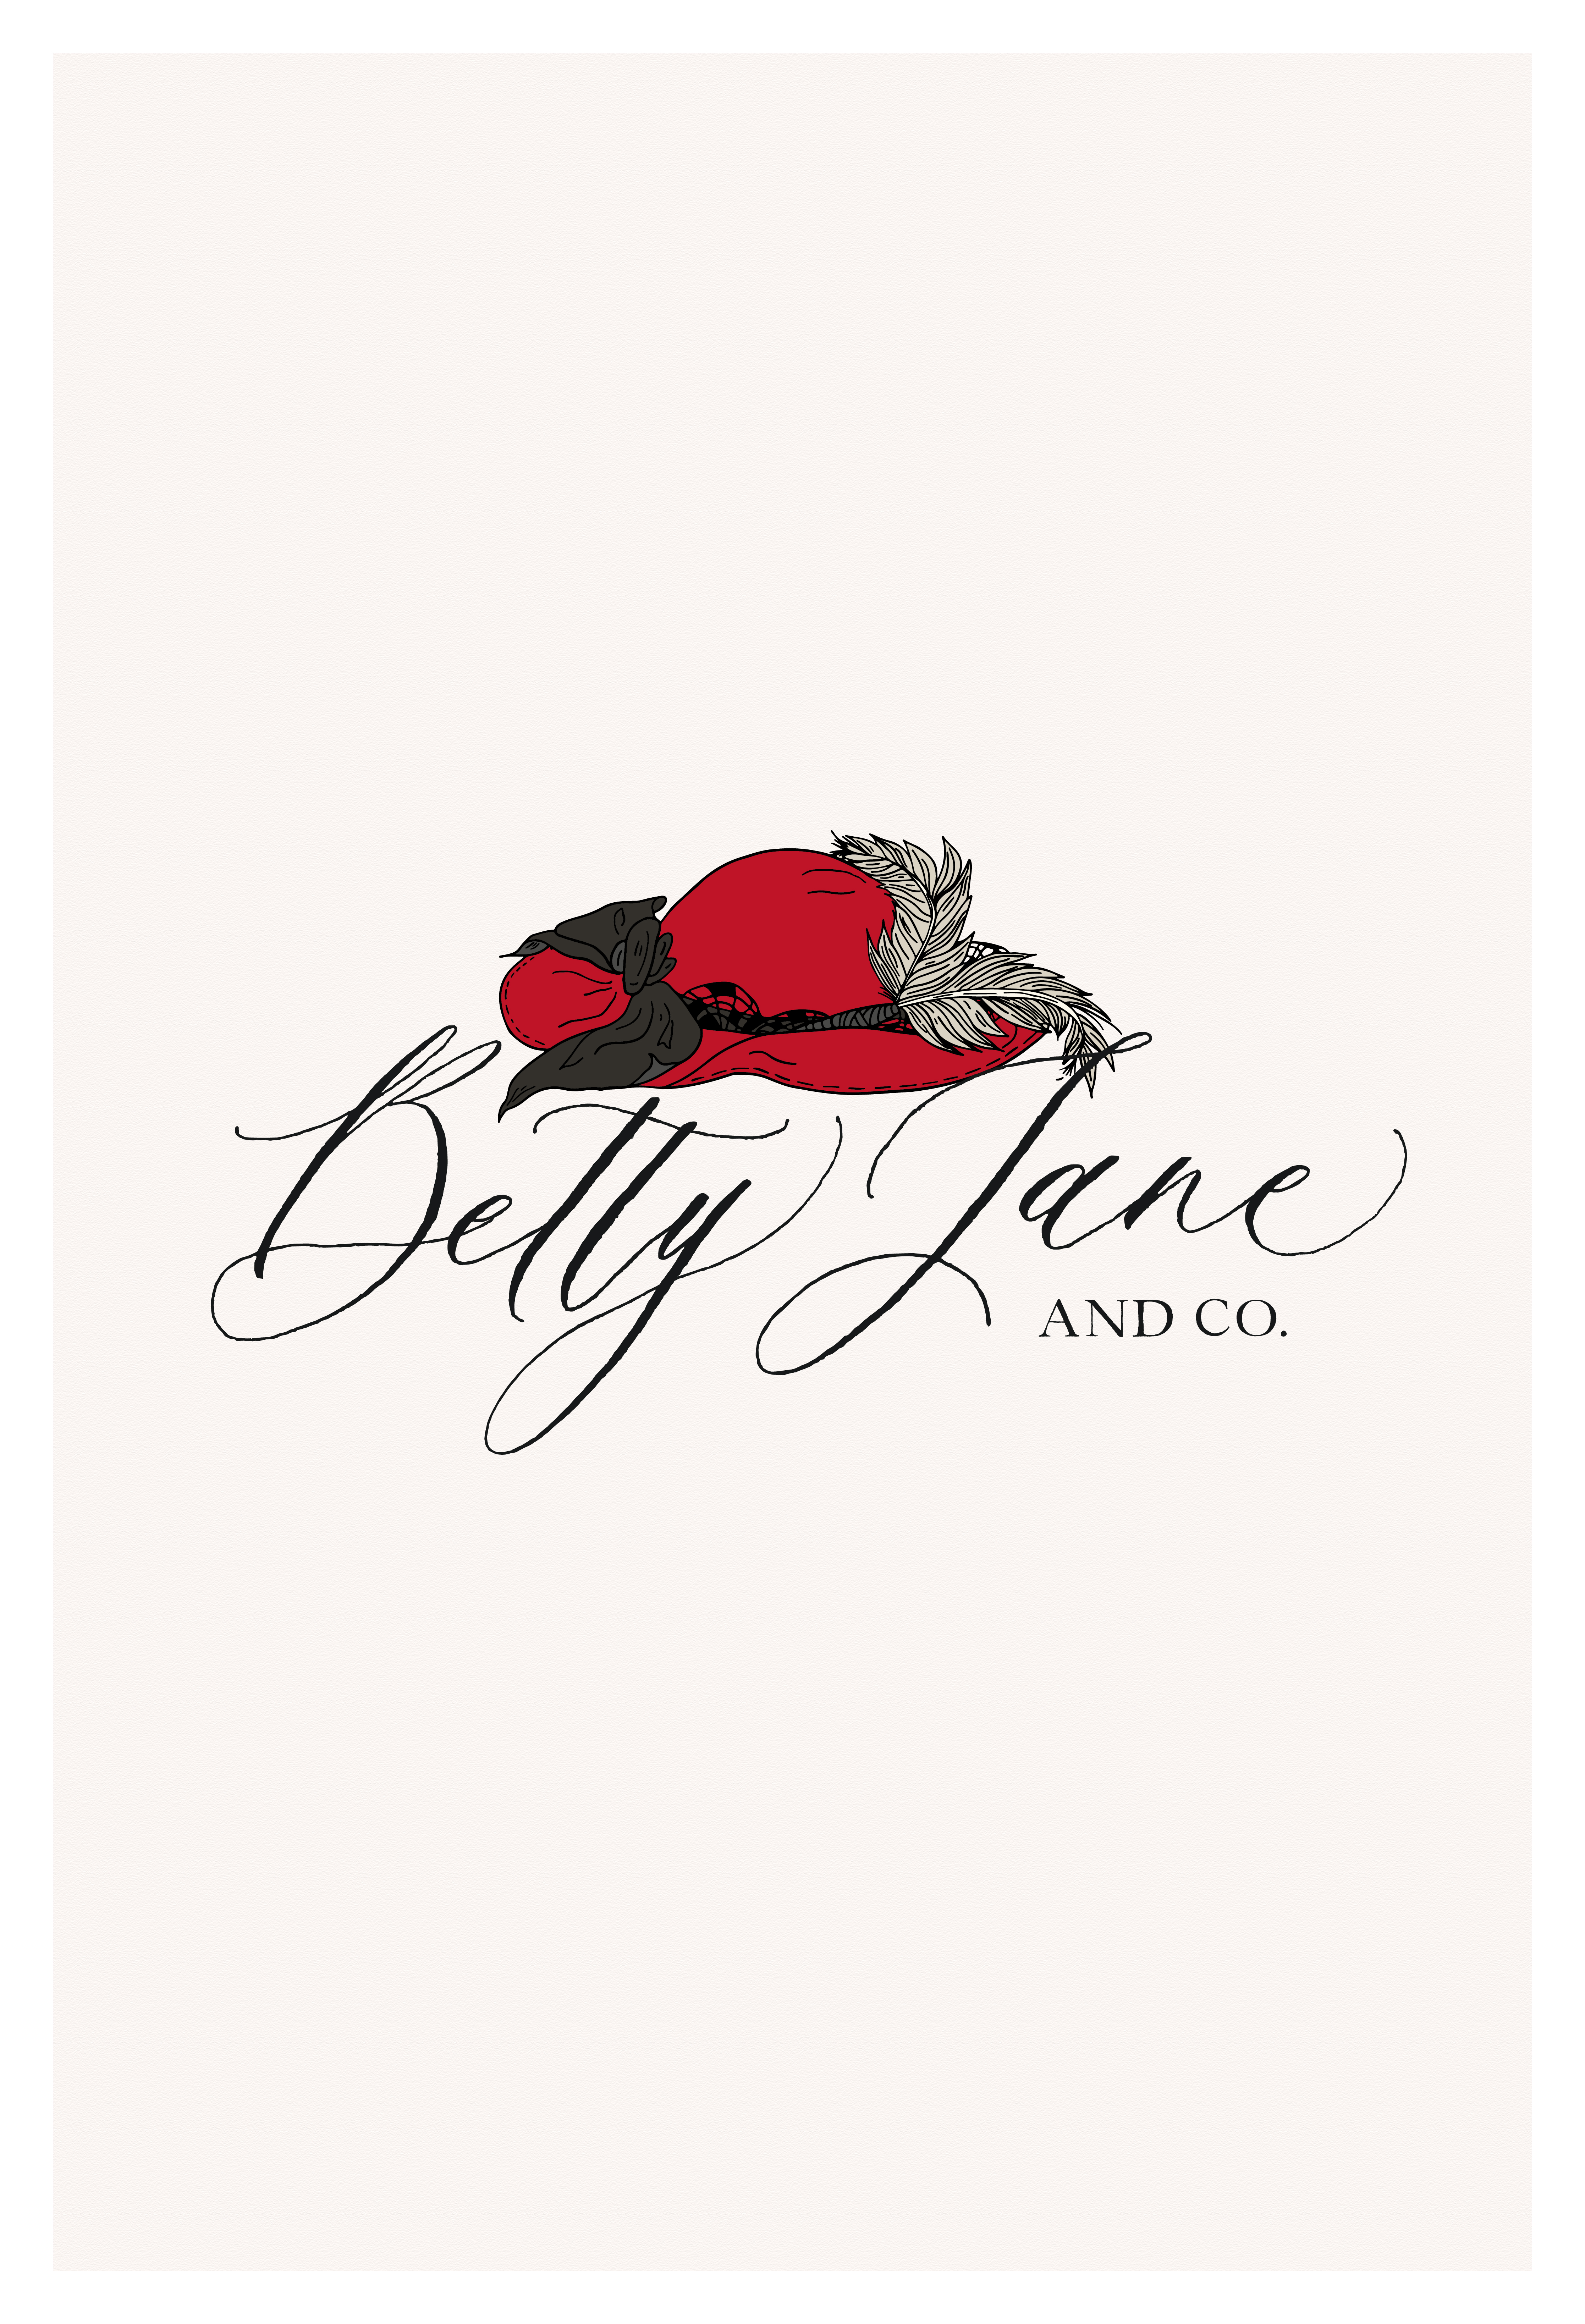 Primary logo for wedding planner Betty Jane & Co.